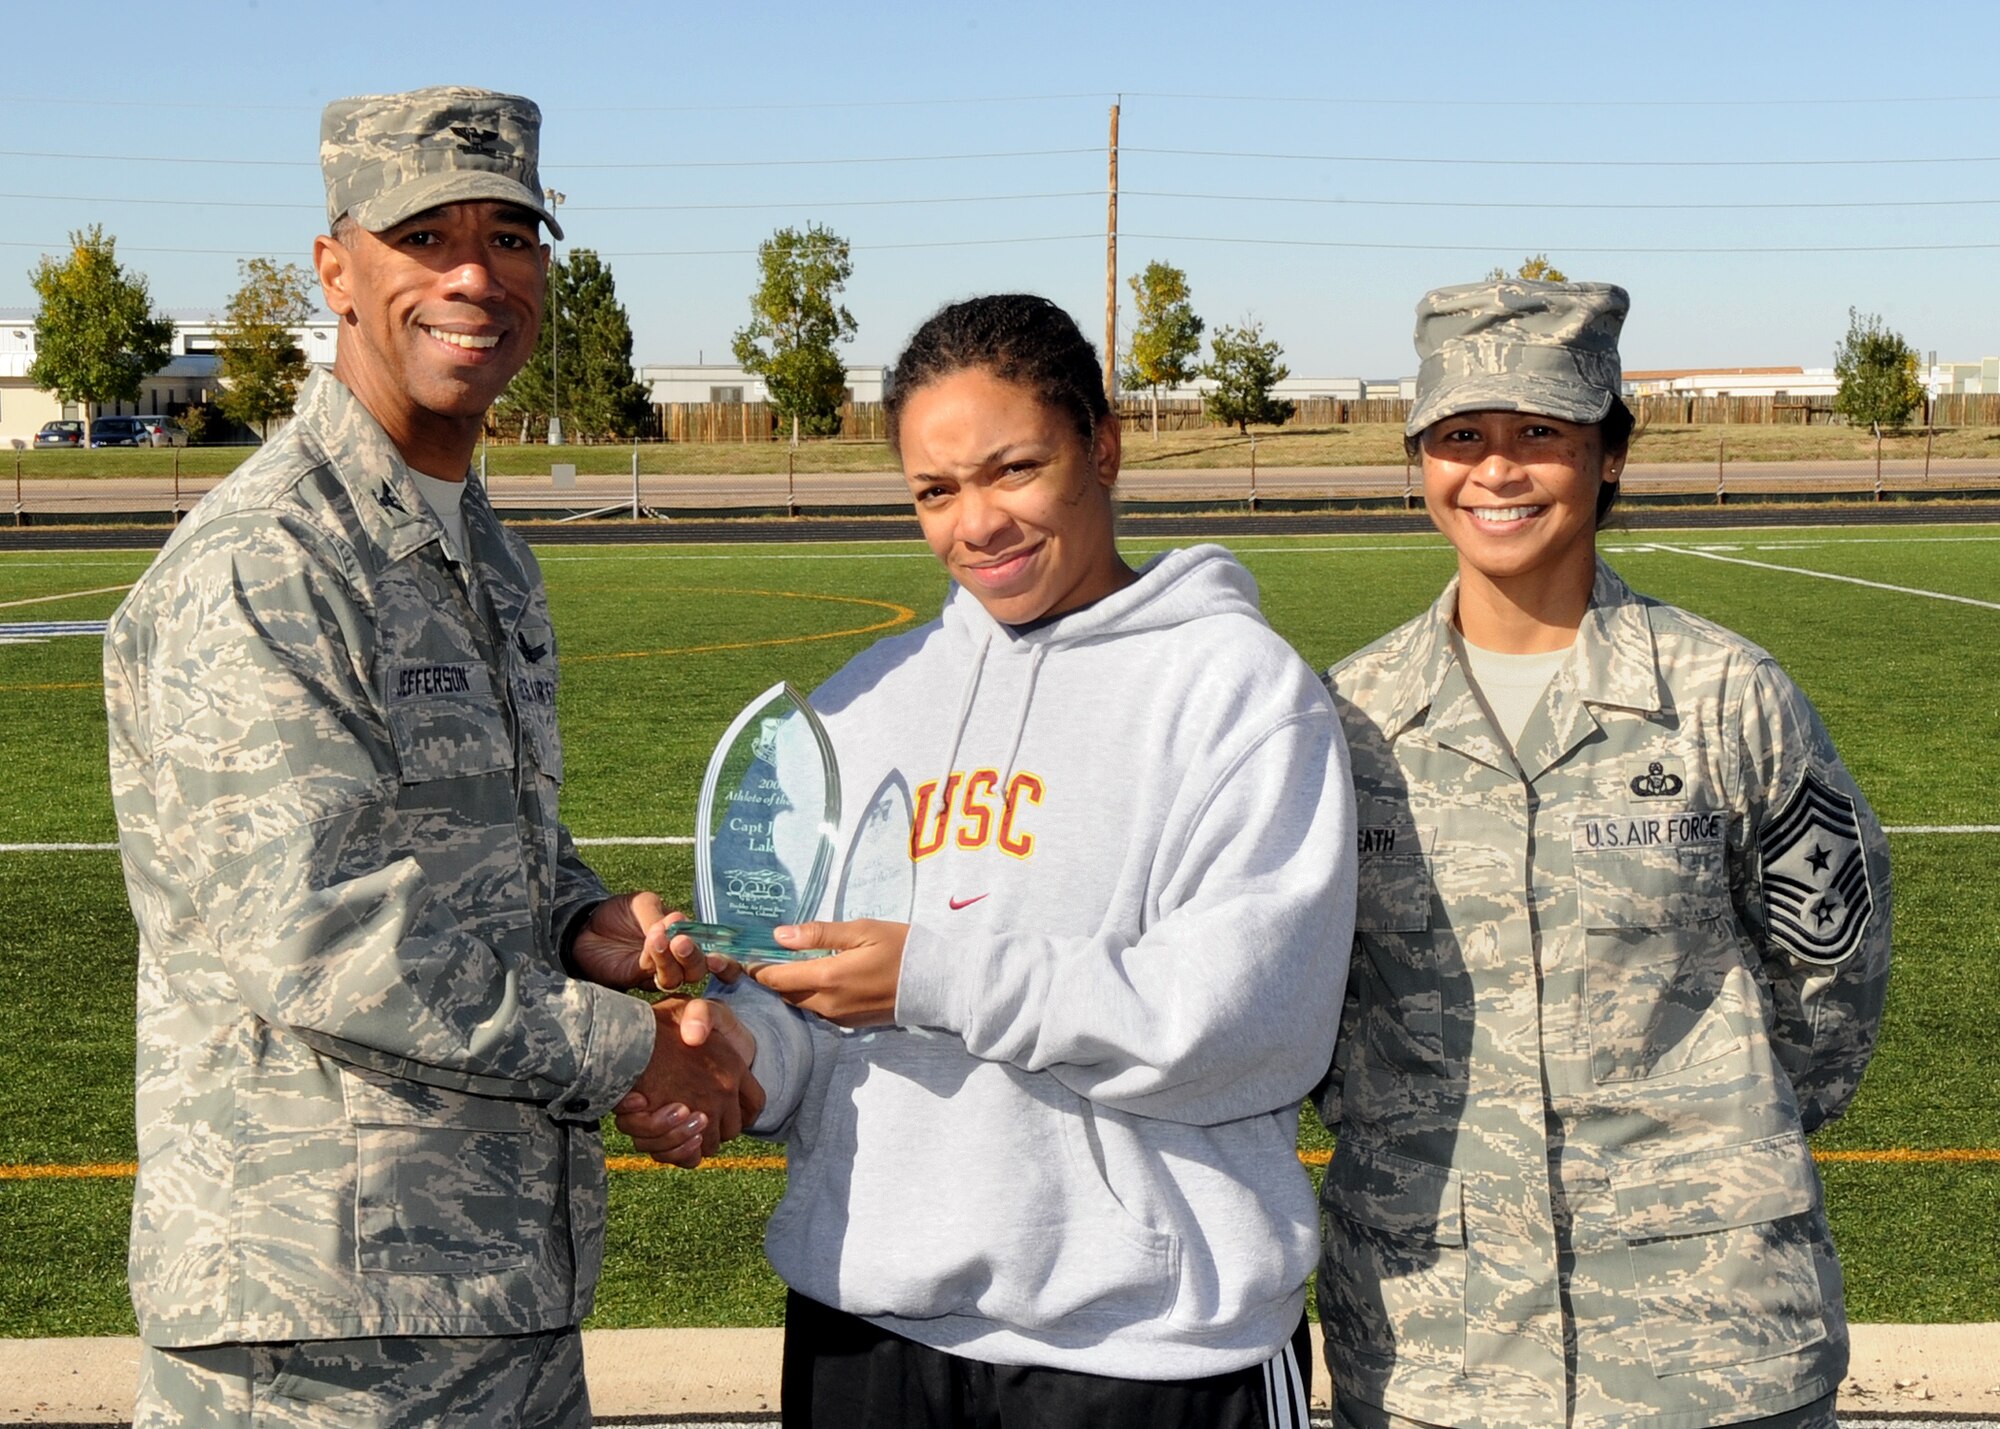 Buckley Air Force Base, Colo. – Col. Vincent Jefferson, 460th Mission Support Group commander, and Chief Master Sergeant Arleen Heath, 460th Space Wing command chief, present Janay Lake Buckley’s 2009 Athlete of the Year trophy during the awards ceremony for Buckley’s Sports and Field Day. Lake will now compete for Air Force Space Command Athlete of the Year. (U. S. Air Force photo by Senior Airman John Easterling)